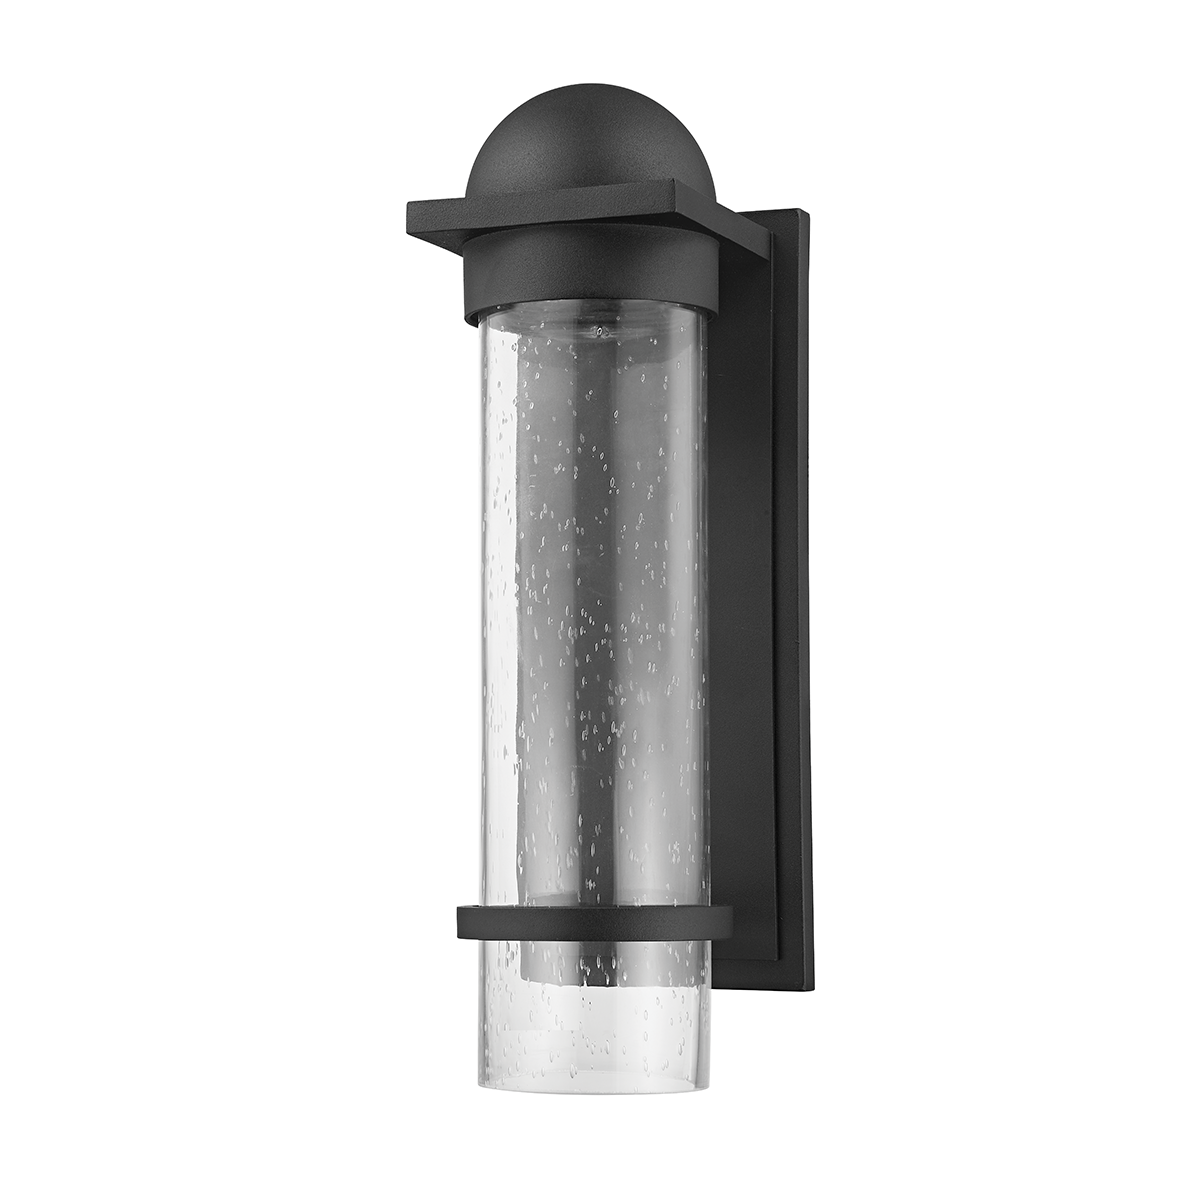 Troy NERO 1 LIGHT LARGE EXTERIOR WALL SCONCE B7116 Outdoor l Wall Troy Lighting TEXTURE BLACK  